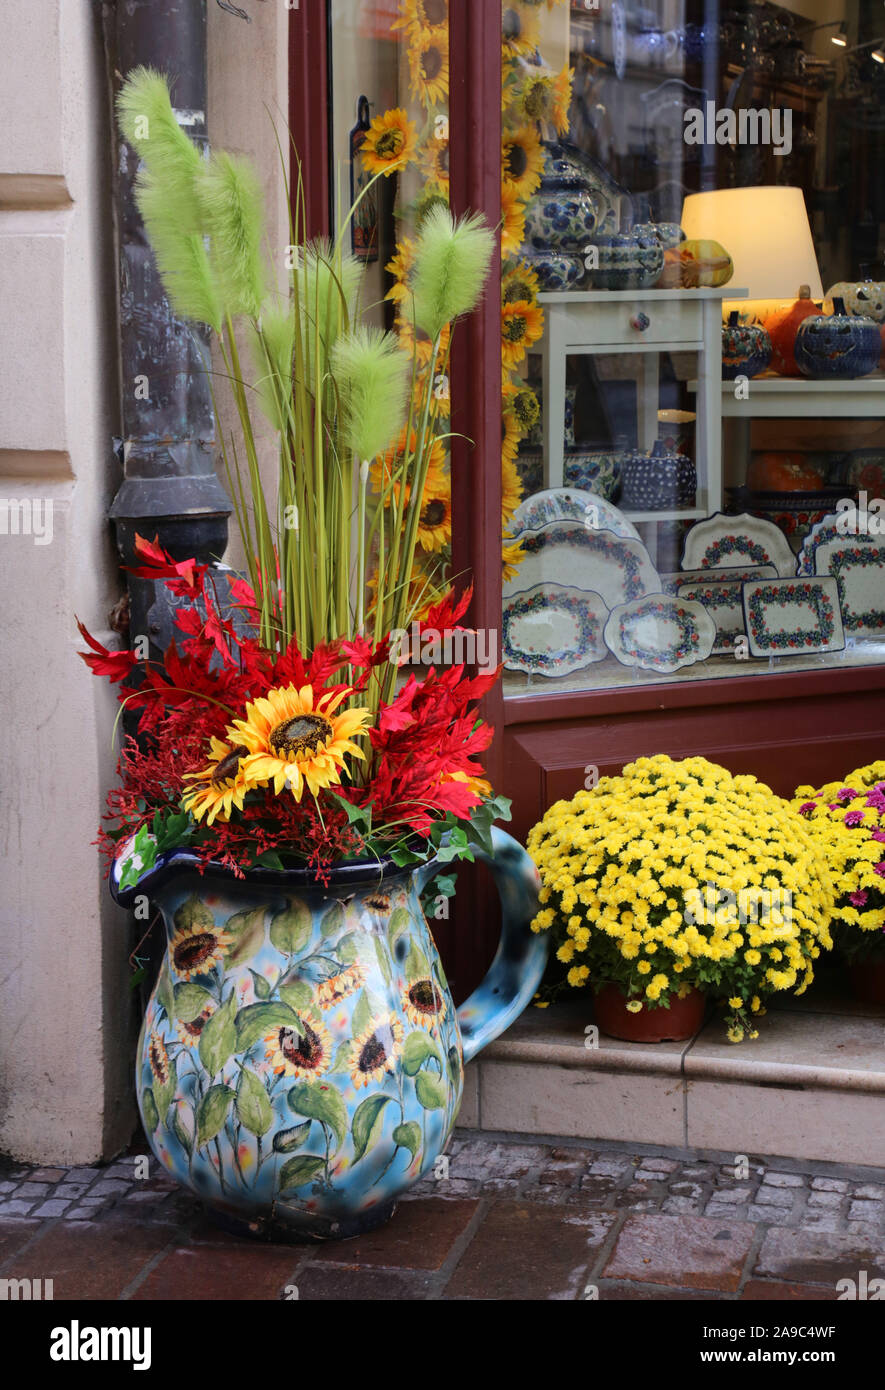 Cracow. Krakow. Poland. Boeslawiec ceramics store decoration in front of the shop. Vase with artificial and natural flowers. Stock Photo